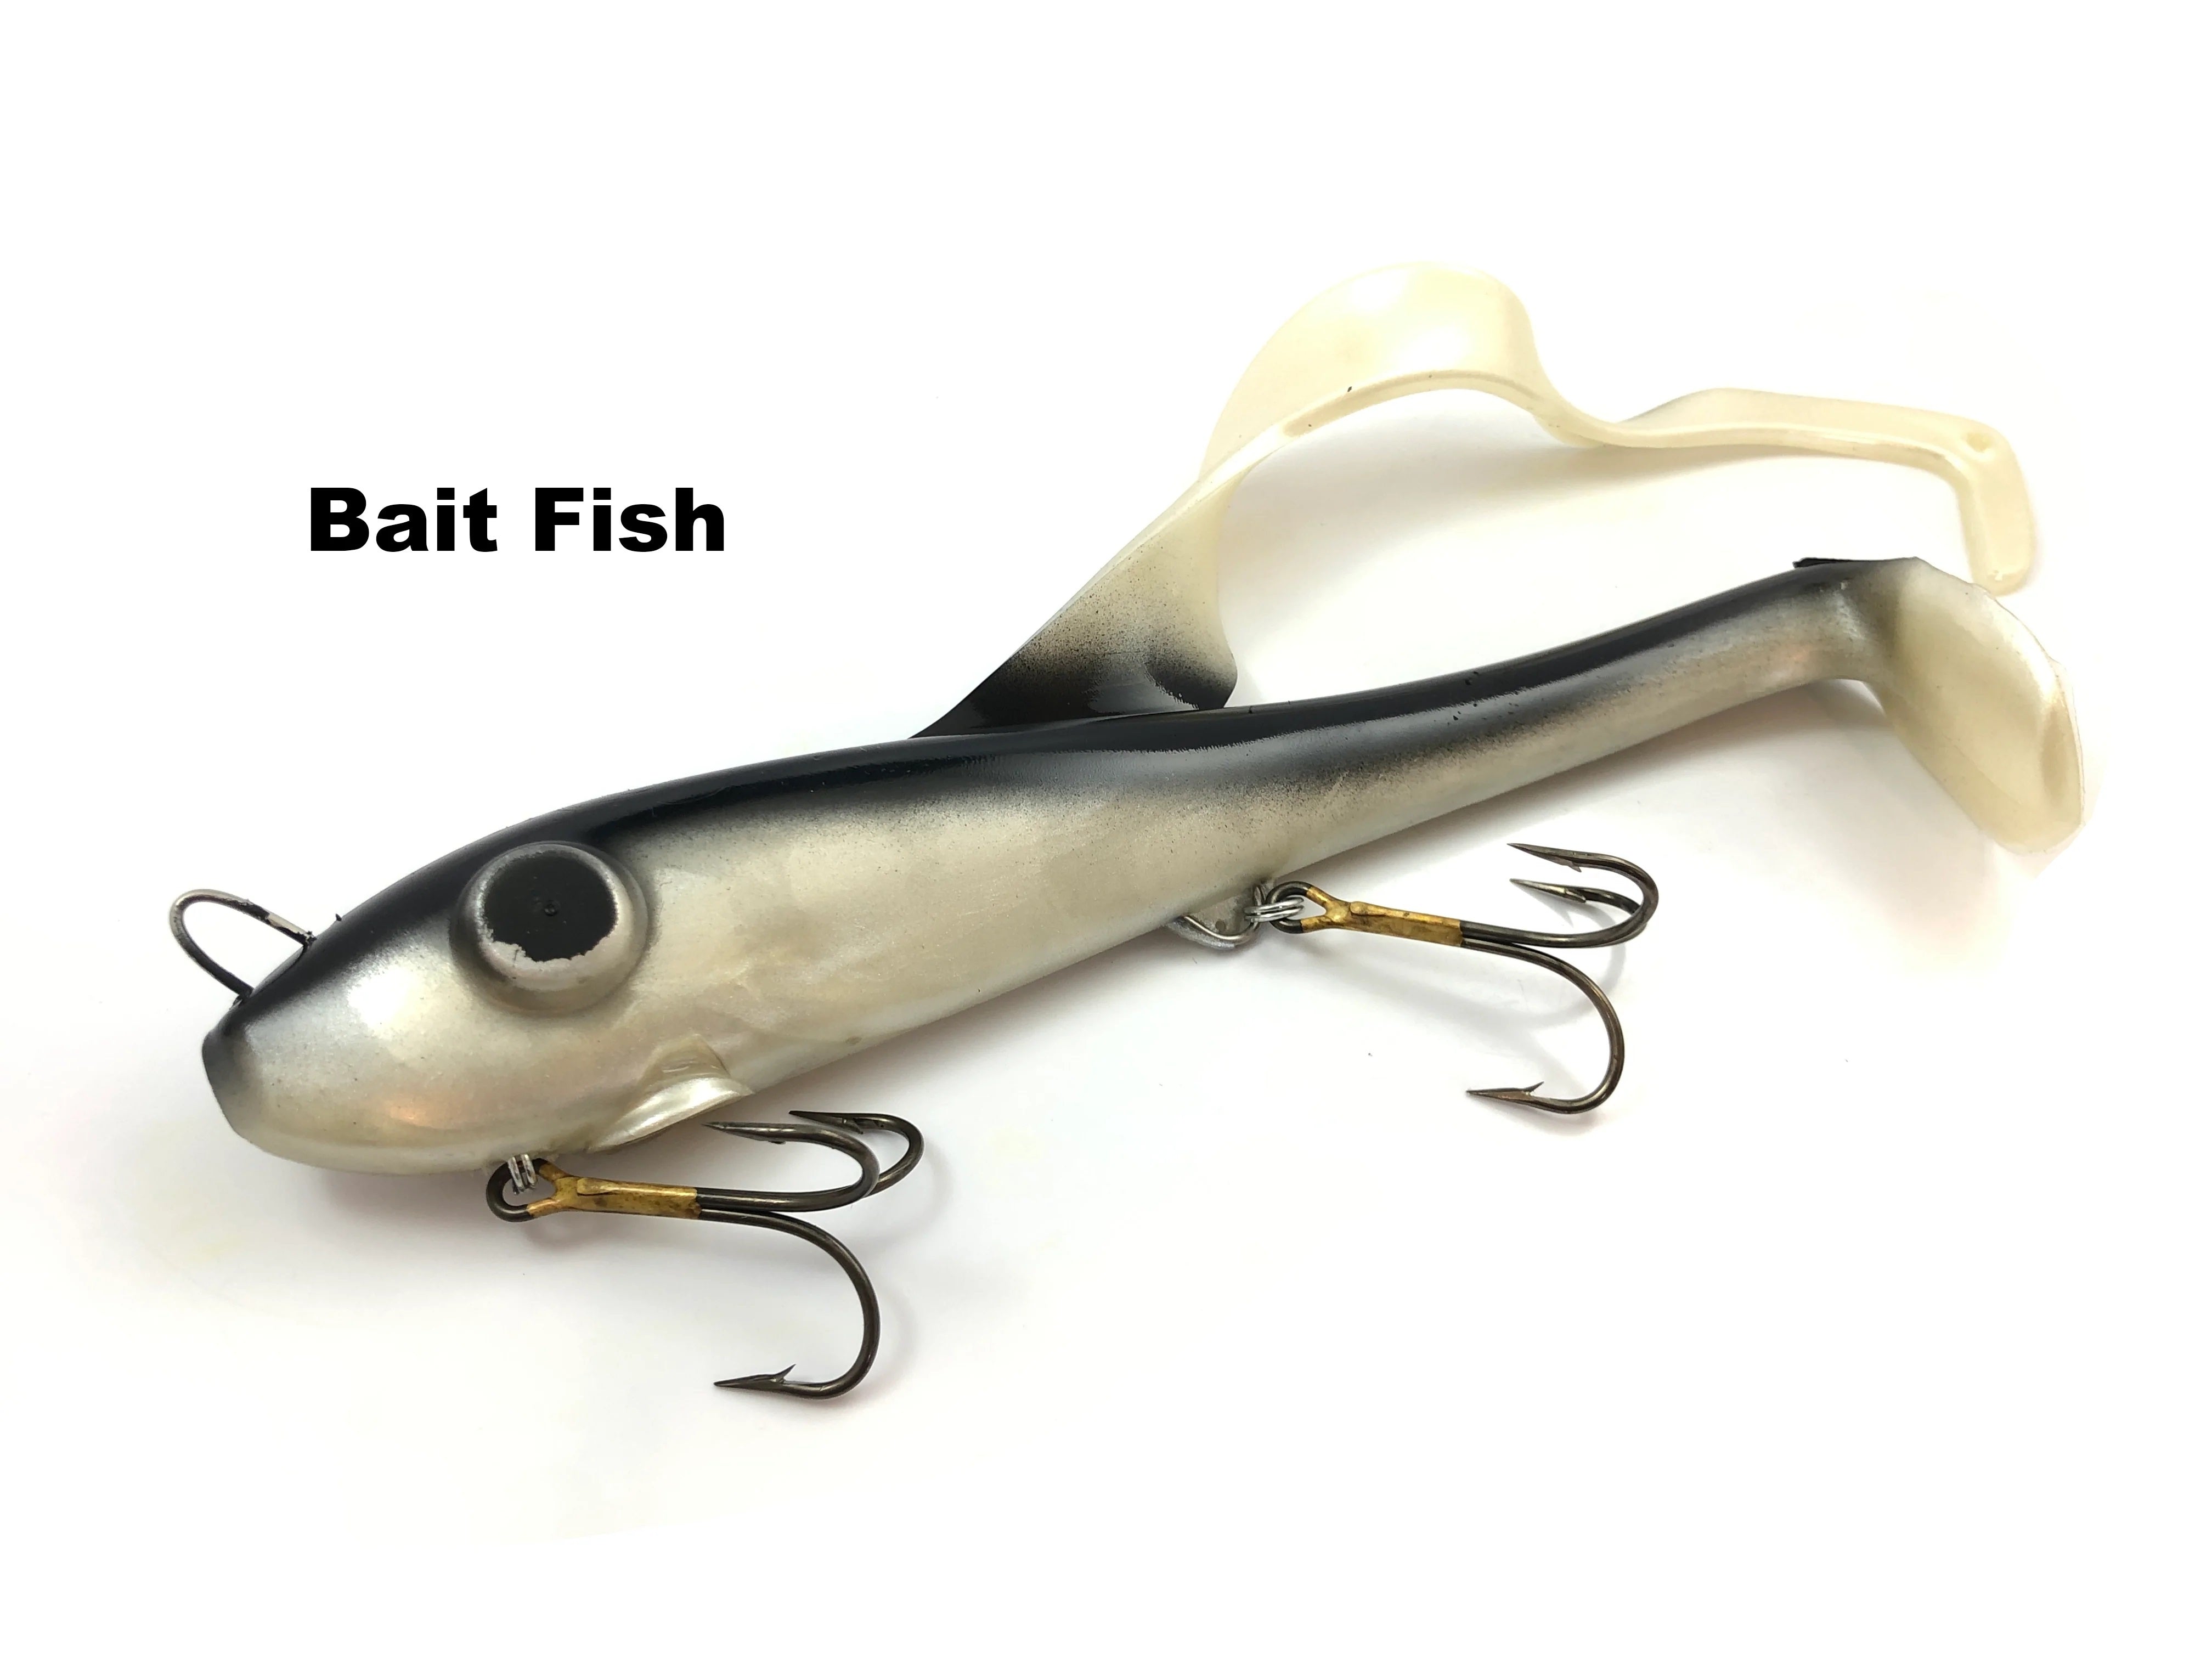 Fish Tail - Small - Musky Tackle Online